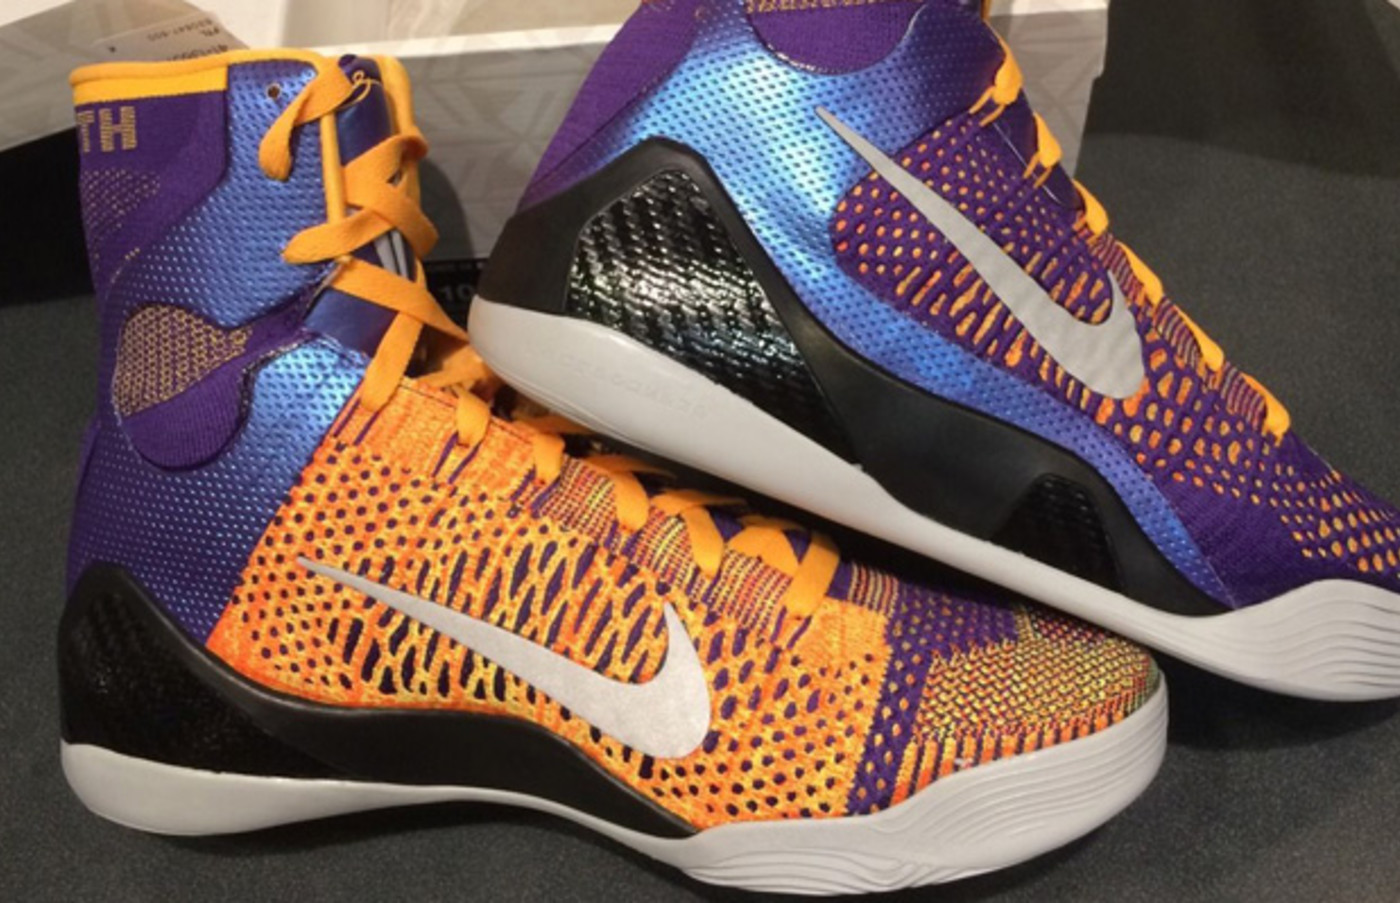 Check Out These Latest Images of the Nike Kobe IX Elite 